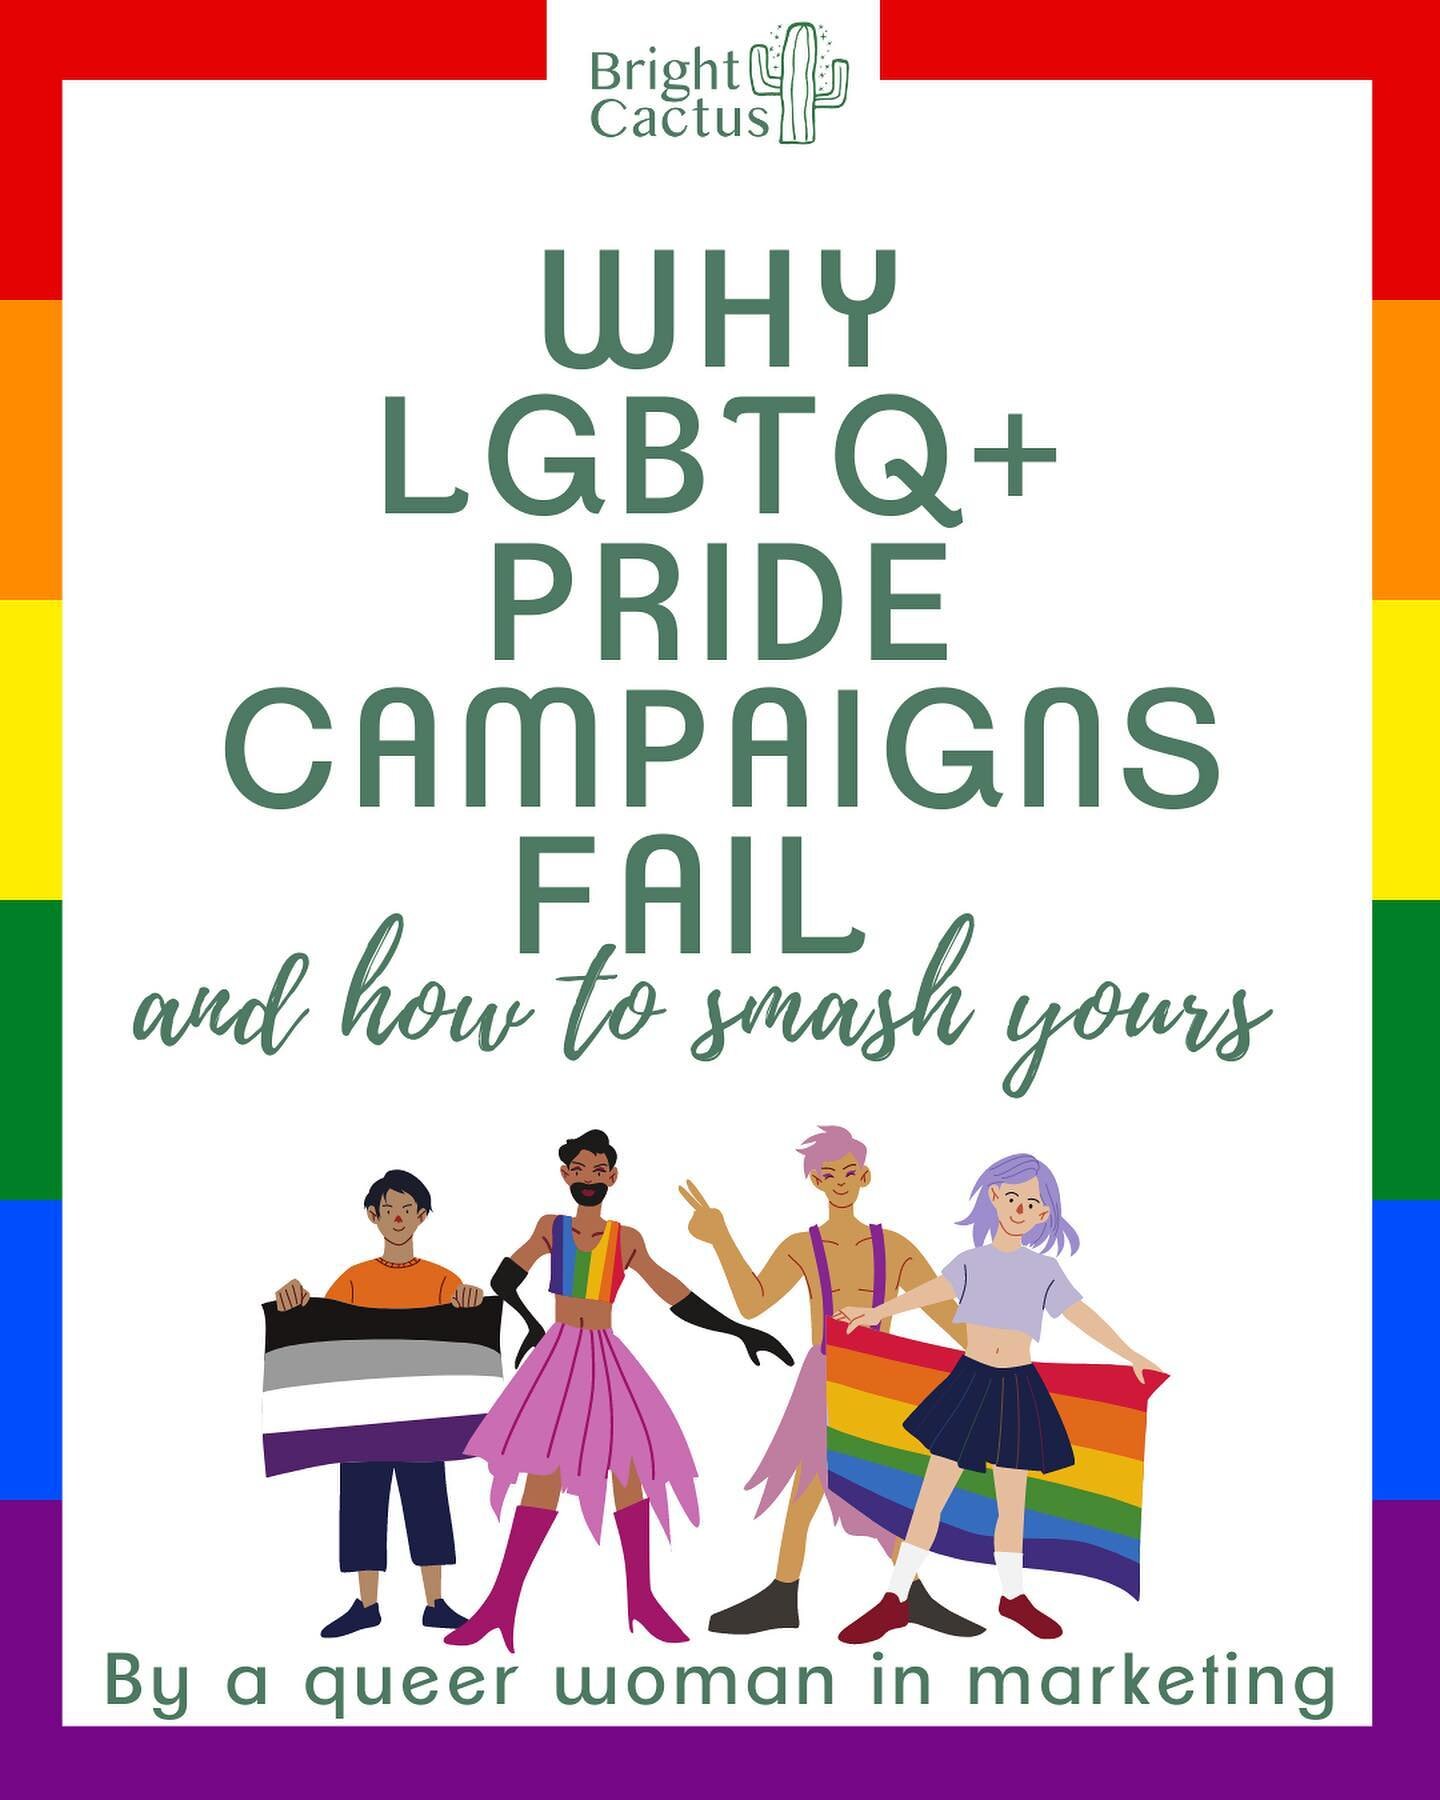 Every year Mardi Gras and Pride roll around, and every year, between celebrations, LGBTQ+ people roll their eyes at the sometimes embarrassing attempts by businesses to get in on the action.

Here are some major things I&rsquo;ve noticed marketers ge